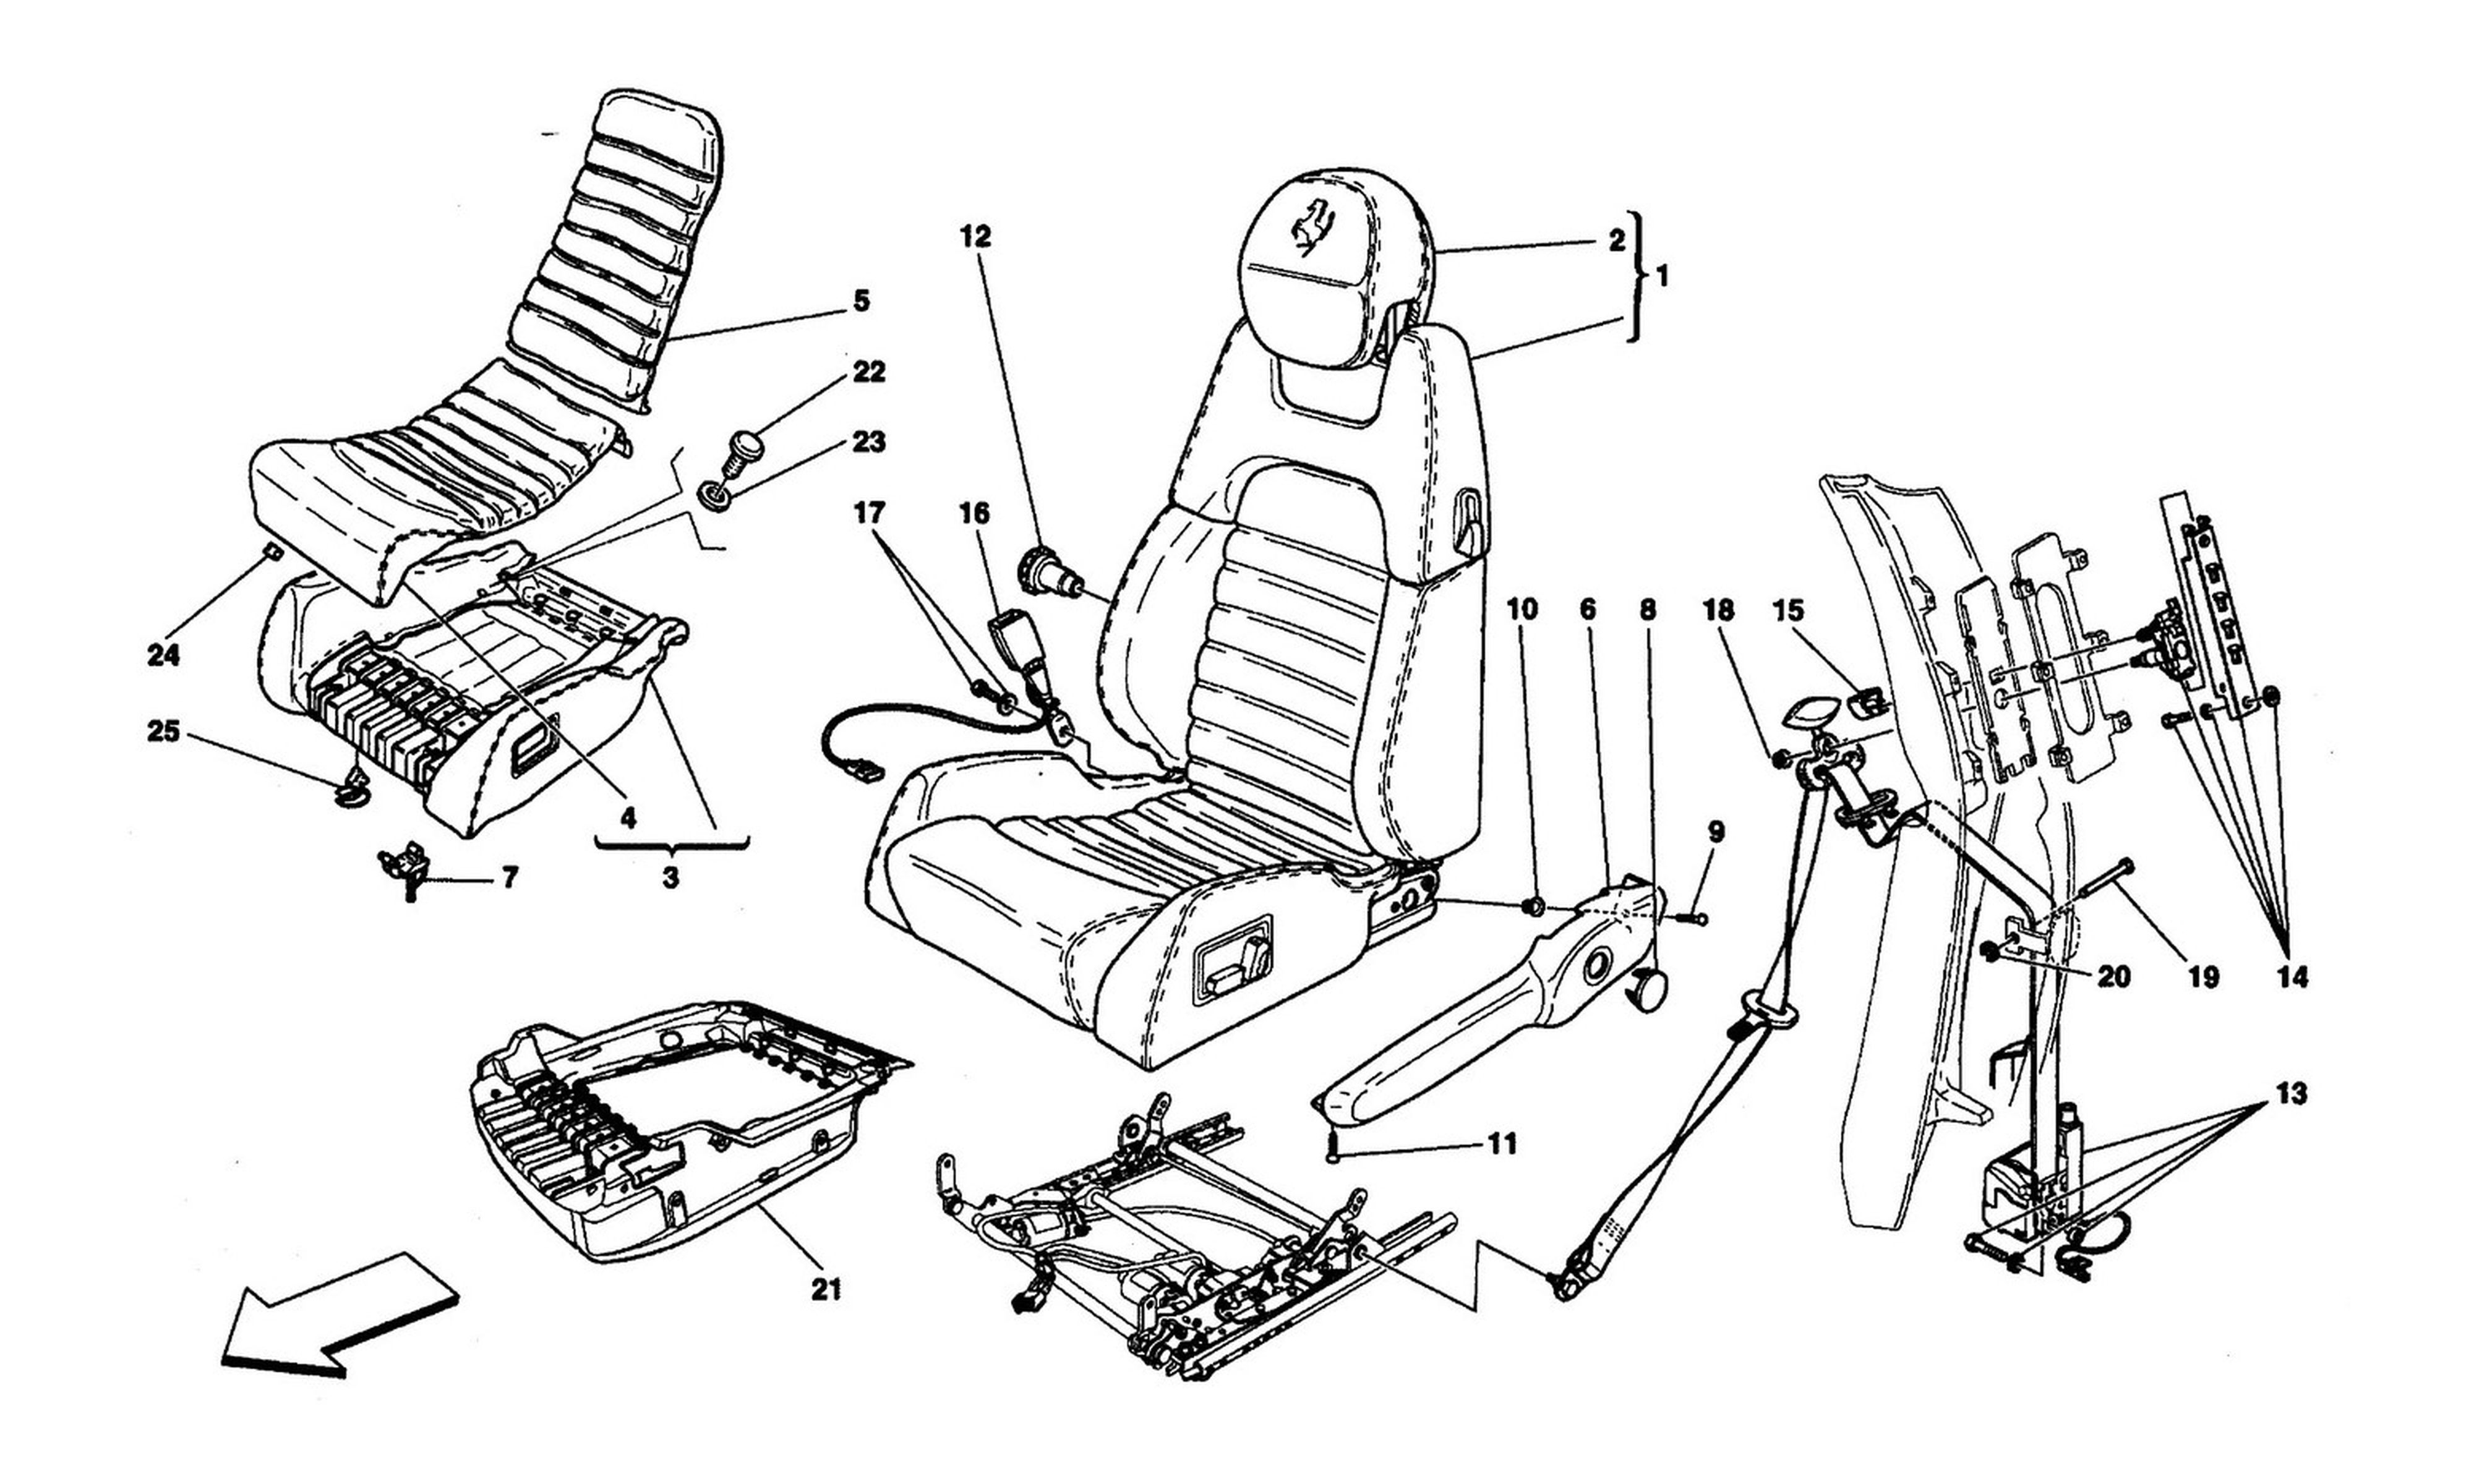 Schematic: Electrical Seat - Safety Belts